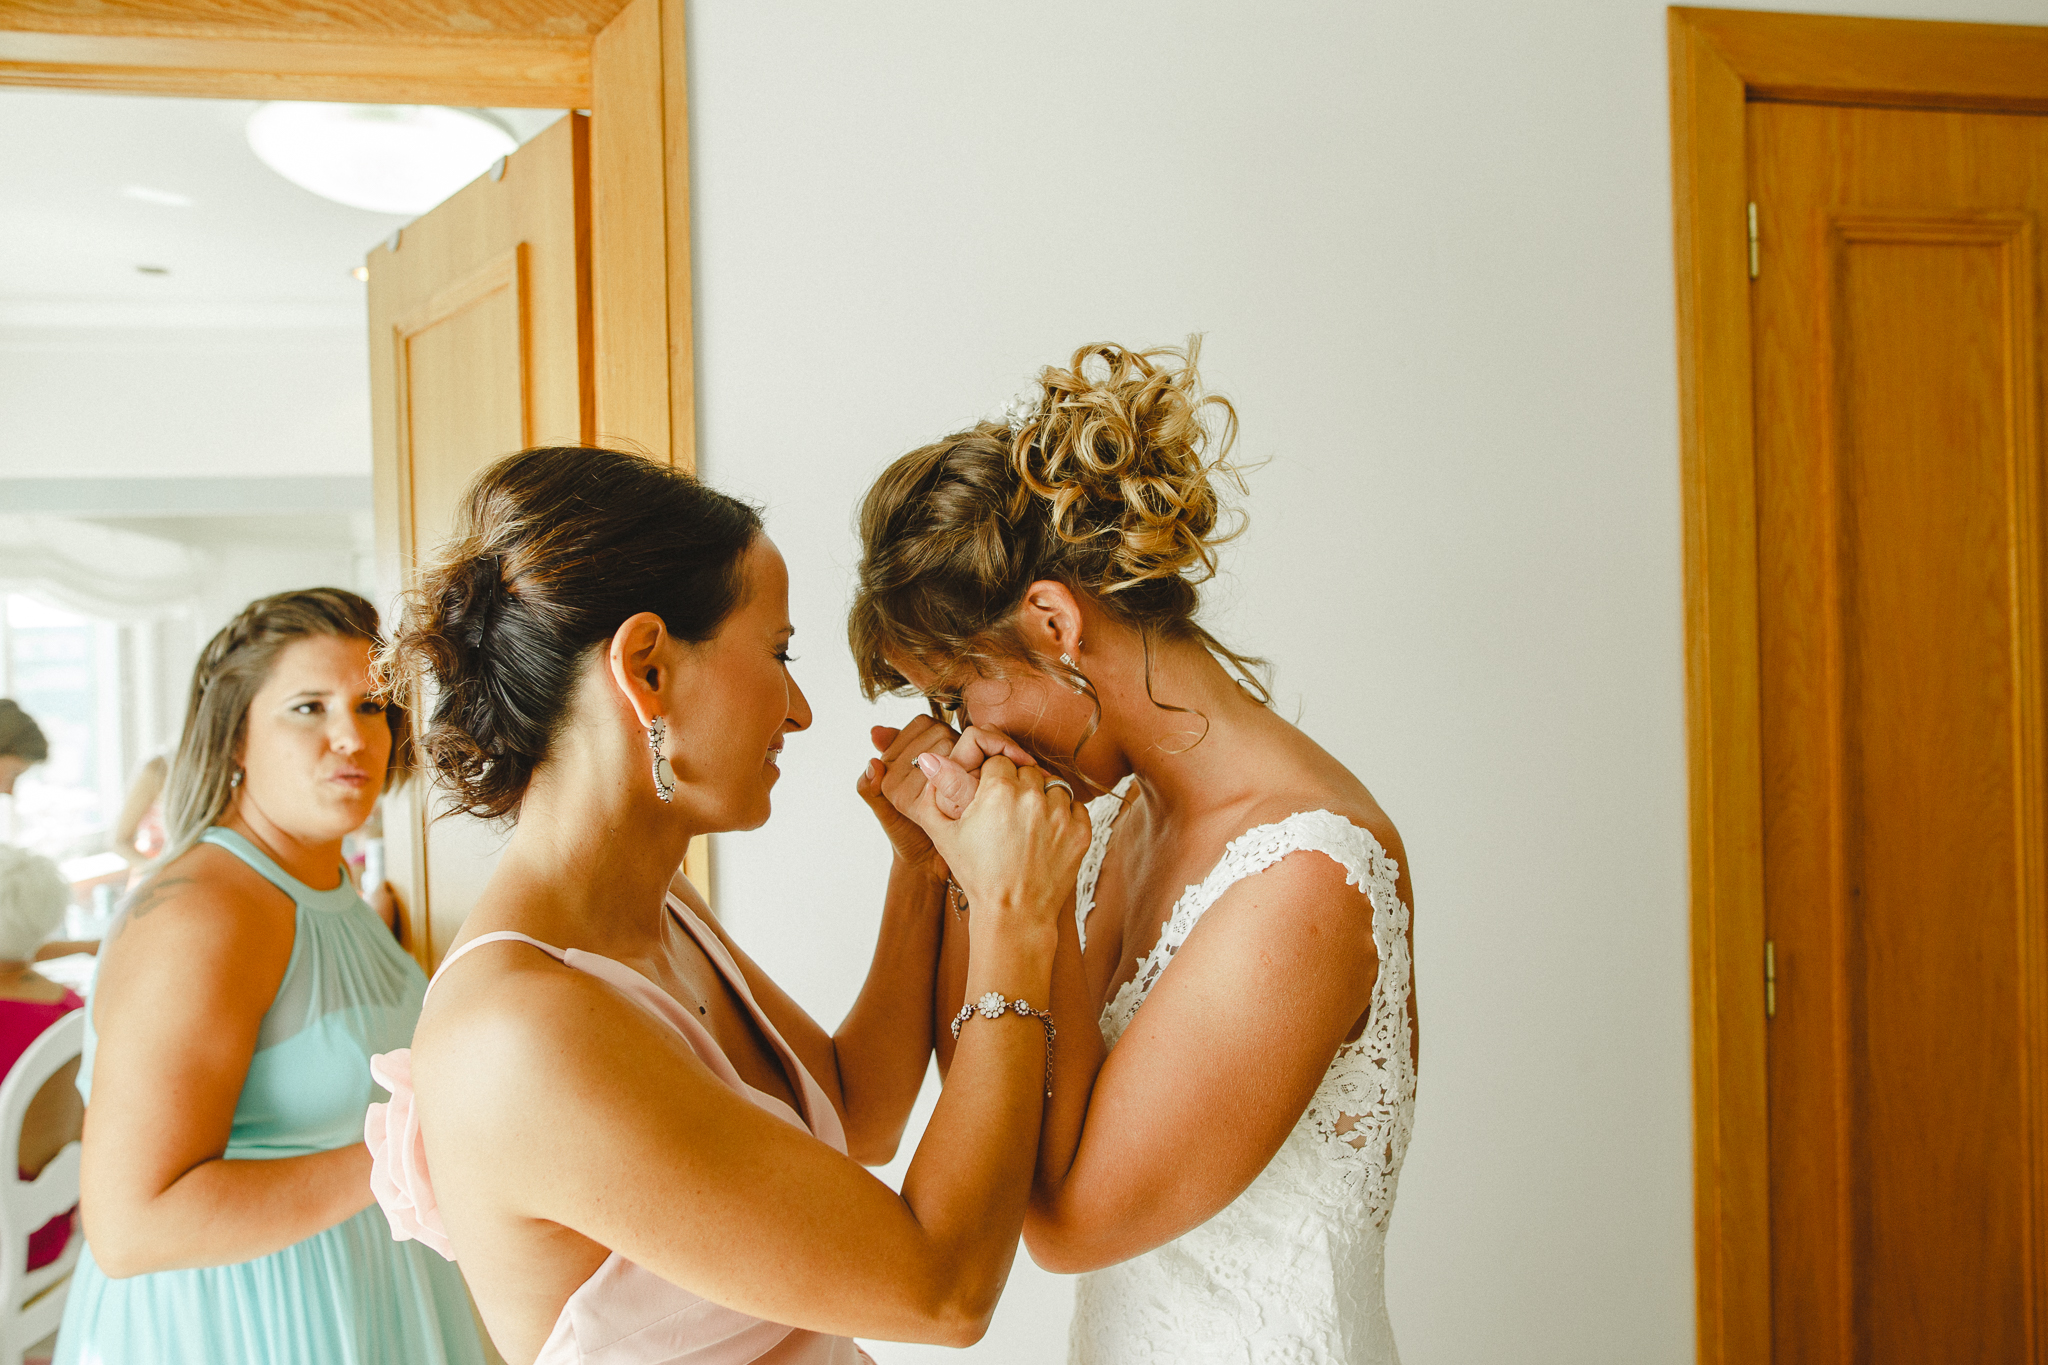 Bride feeling moved holding a friend's hands